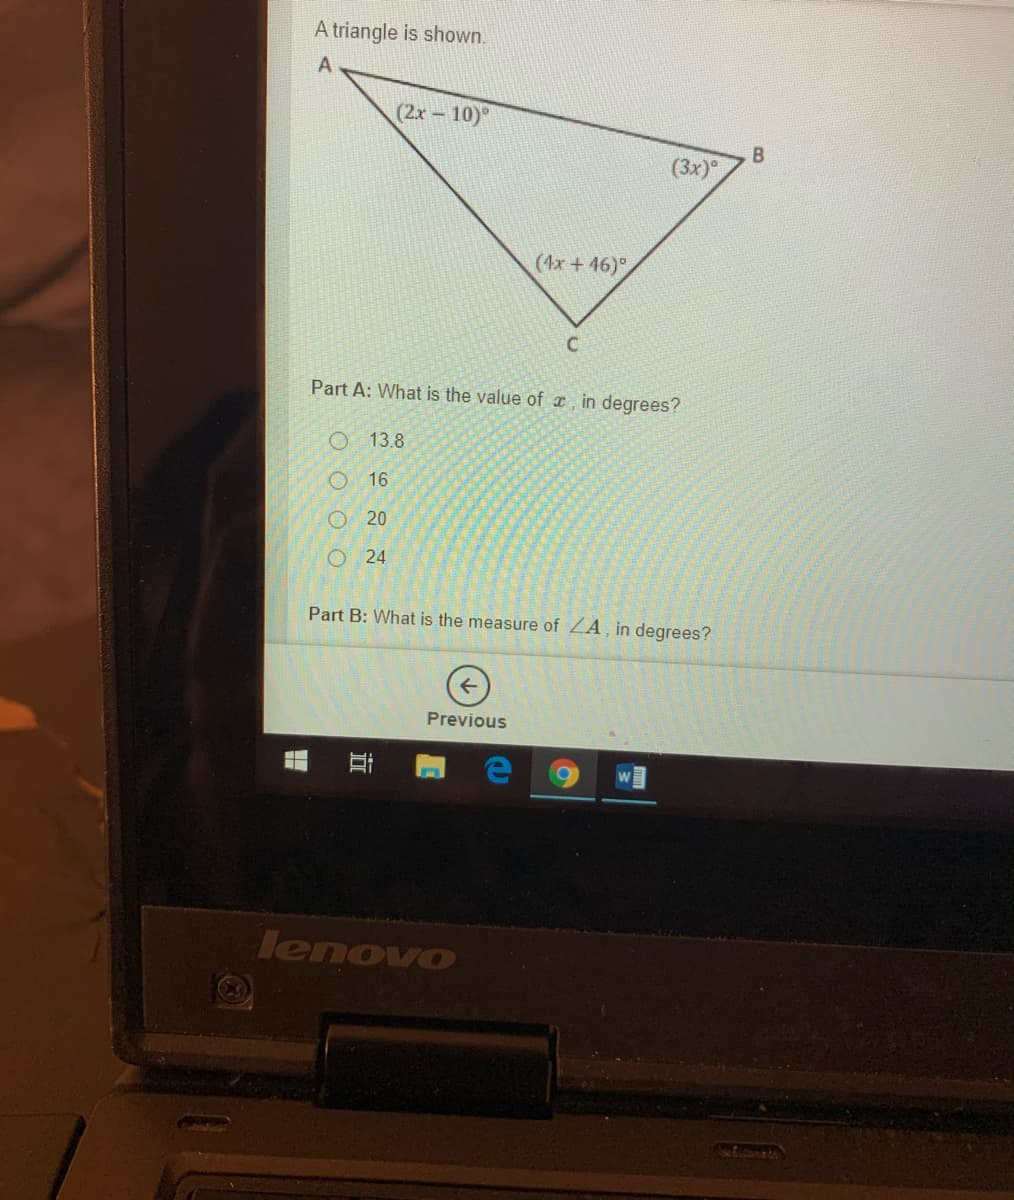 A triangle is shown.
(2x 10)°
(3x)
(4x + 46)°
Part A: What is the value of T, in degrees?
O 13.8
16
O 20
O 24
Part B: What is the measure of ZA, in degrees?
Previous
lenovo
EGO
近
O O O O
